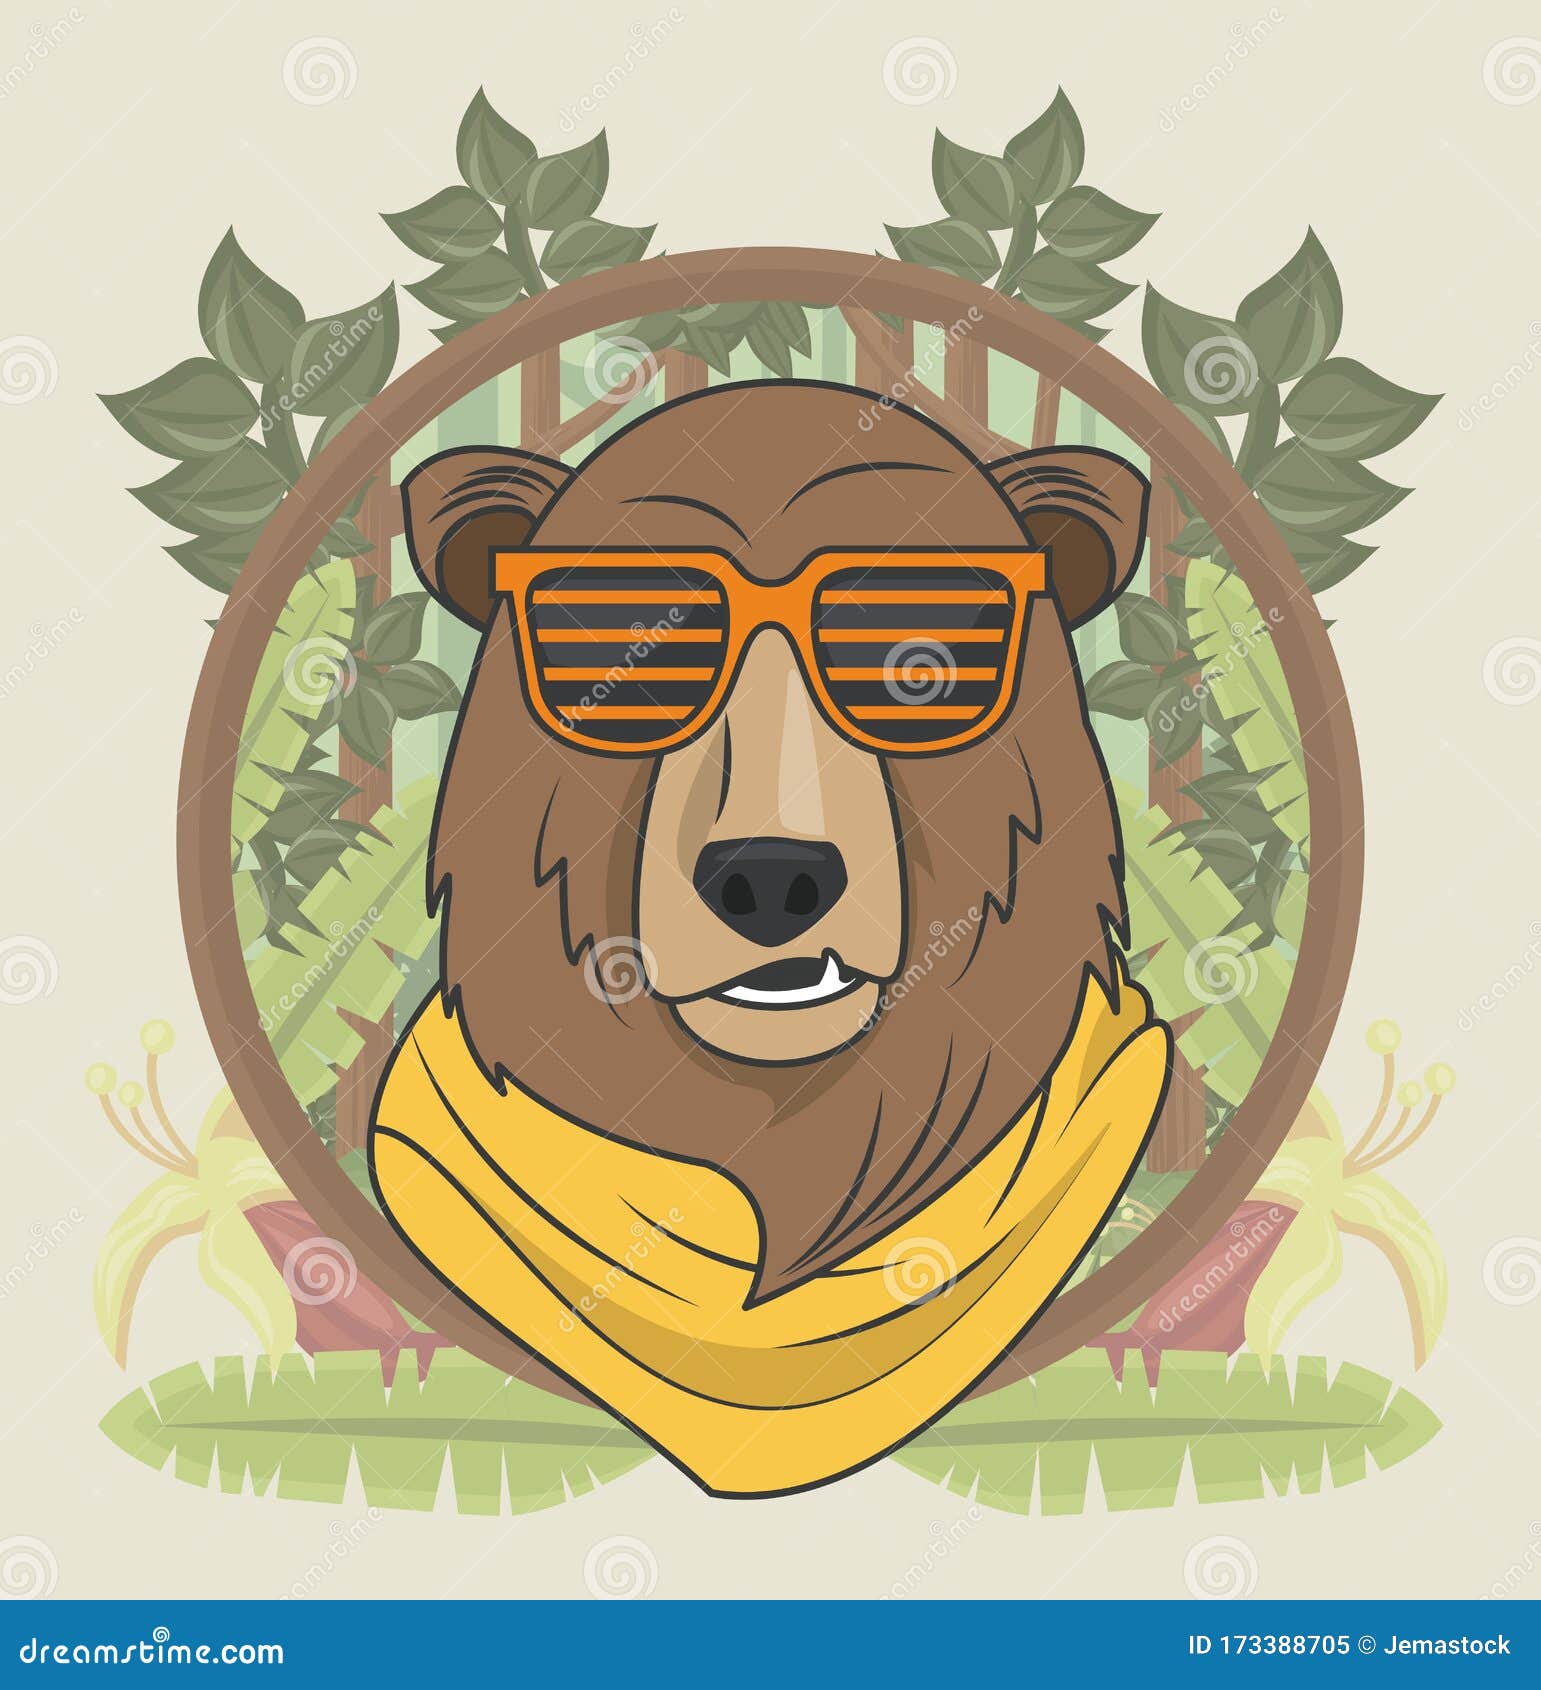 https://thumbs.dreamstime.com/z/funny-bear-grizzly-sunglasses-cool-style-vector-illustration-design-173388705.jpg